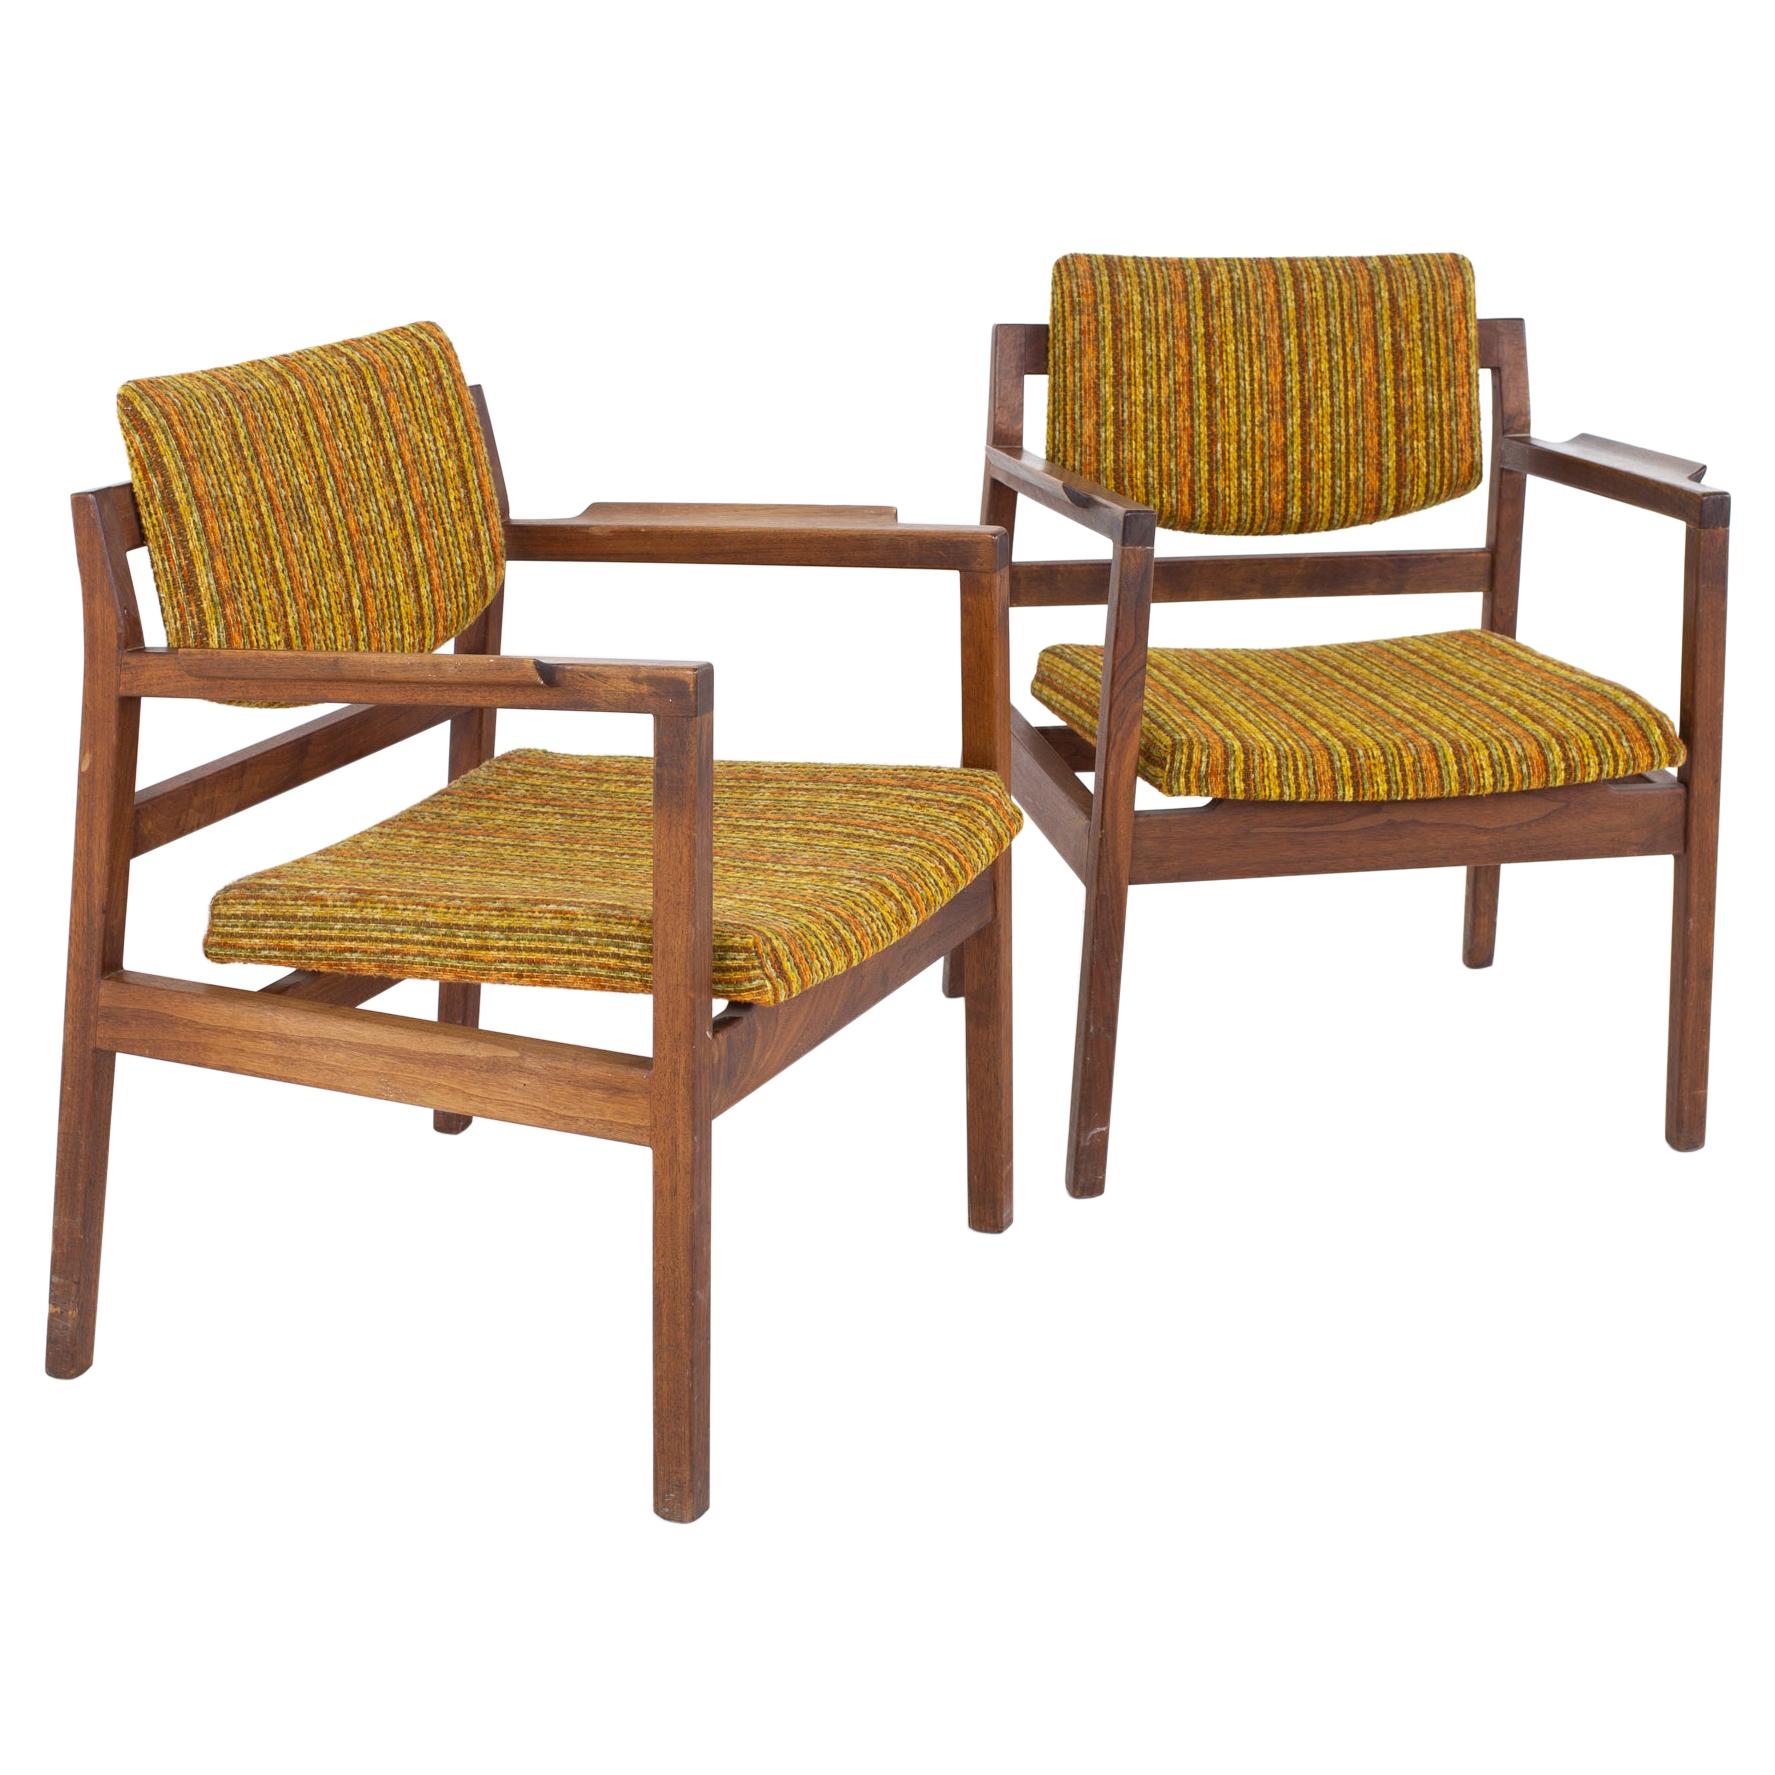 Jens Risom Mid Century Arm Chairs, a Pair